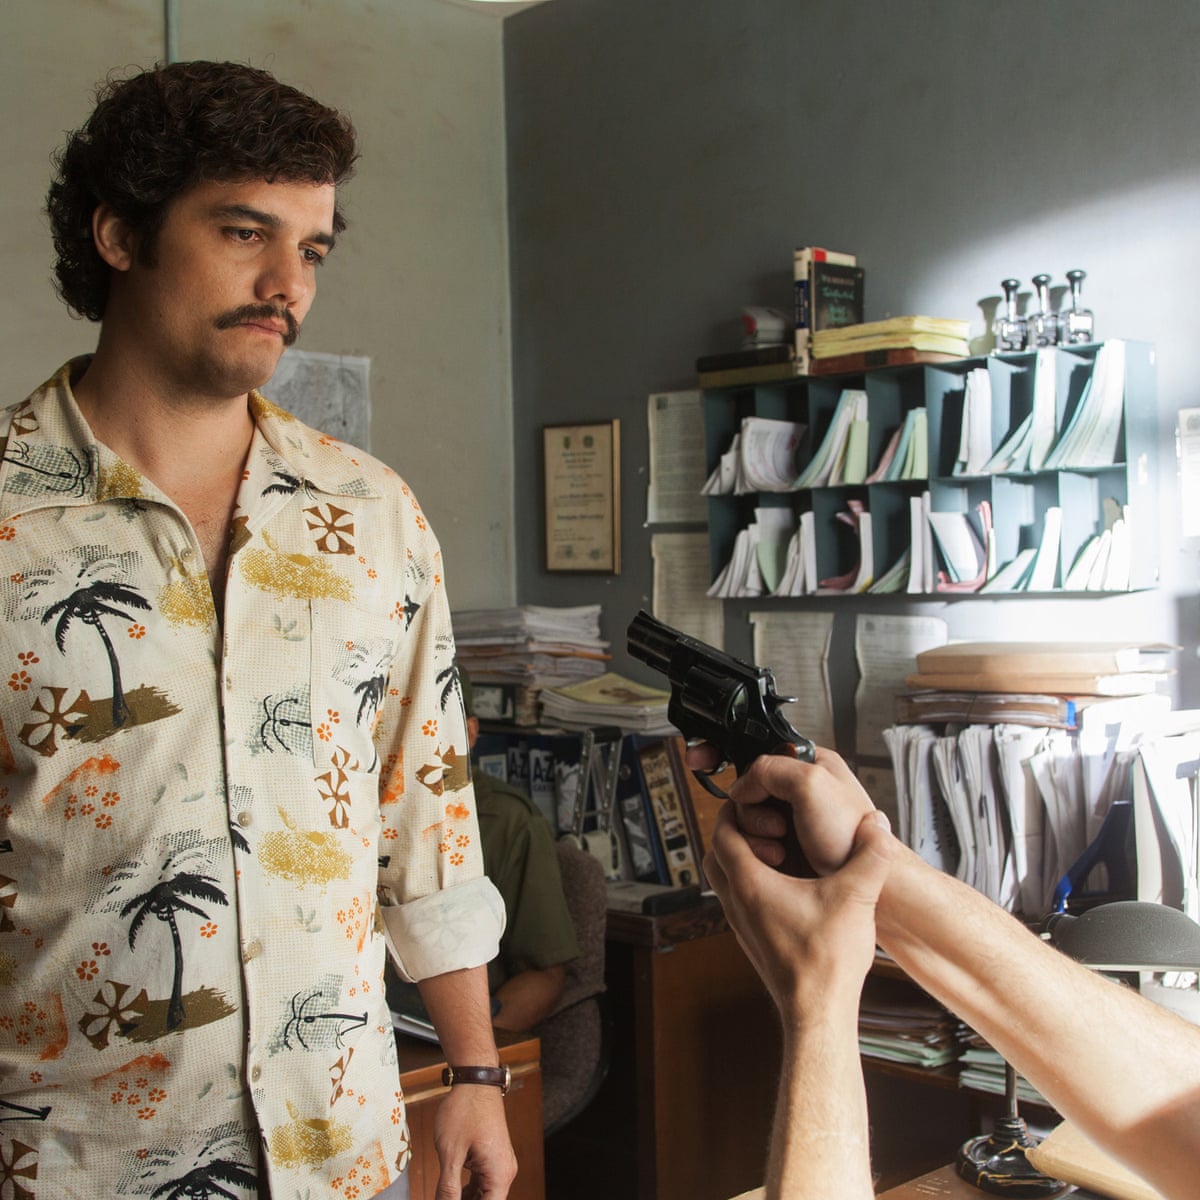 Narcos is a hit for Netflix but iffy accents grate on Colombian ears |  Colombia | The Guardian